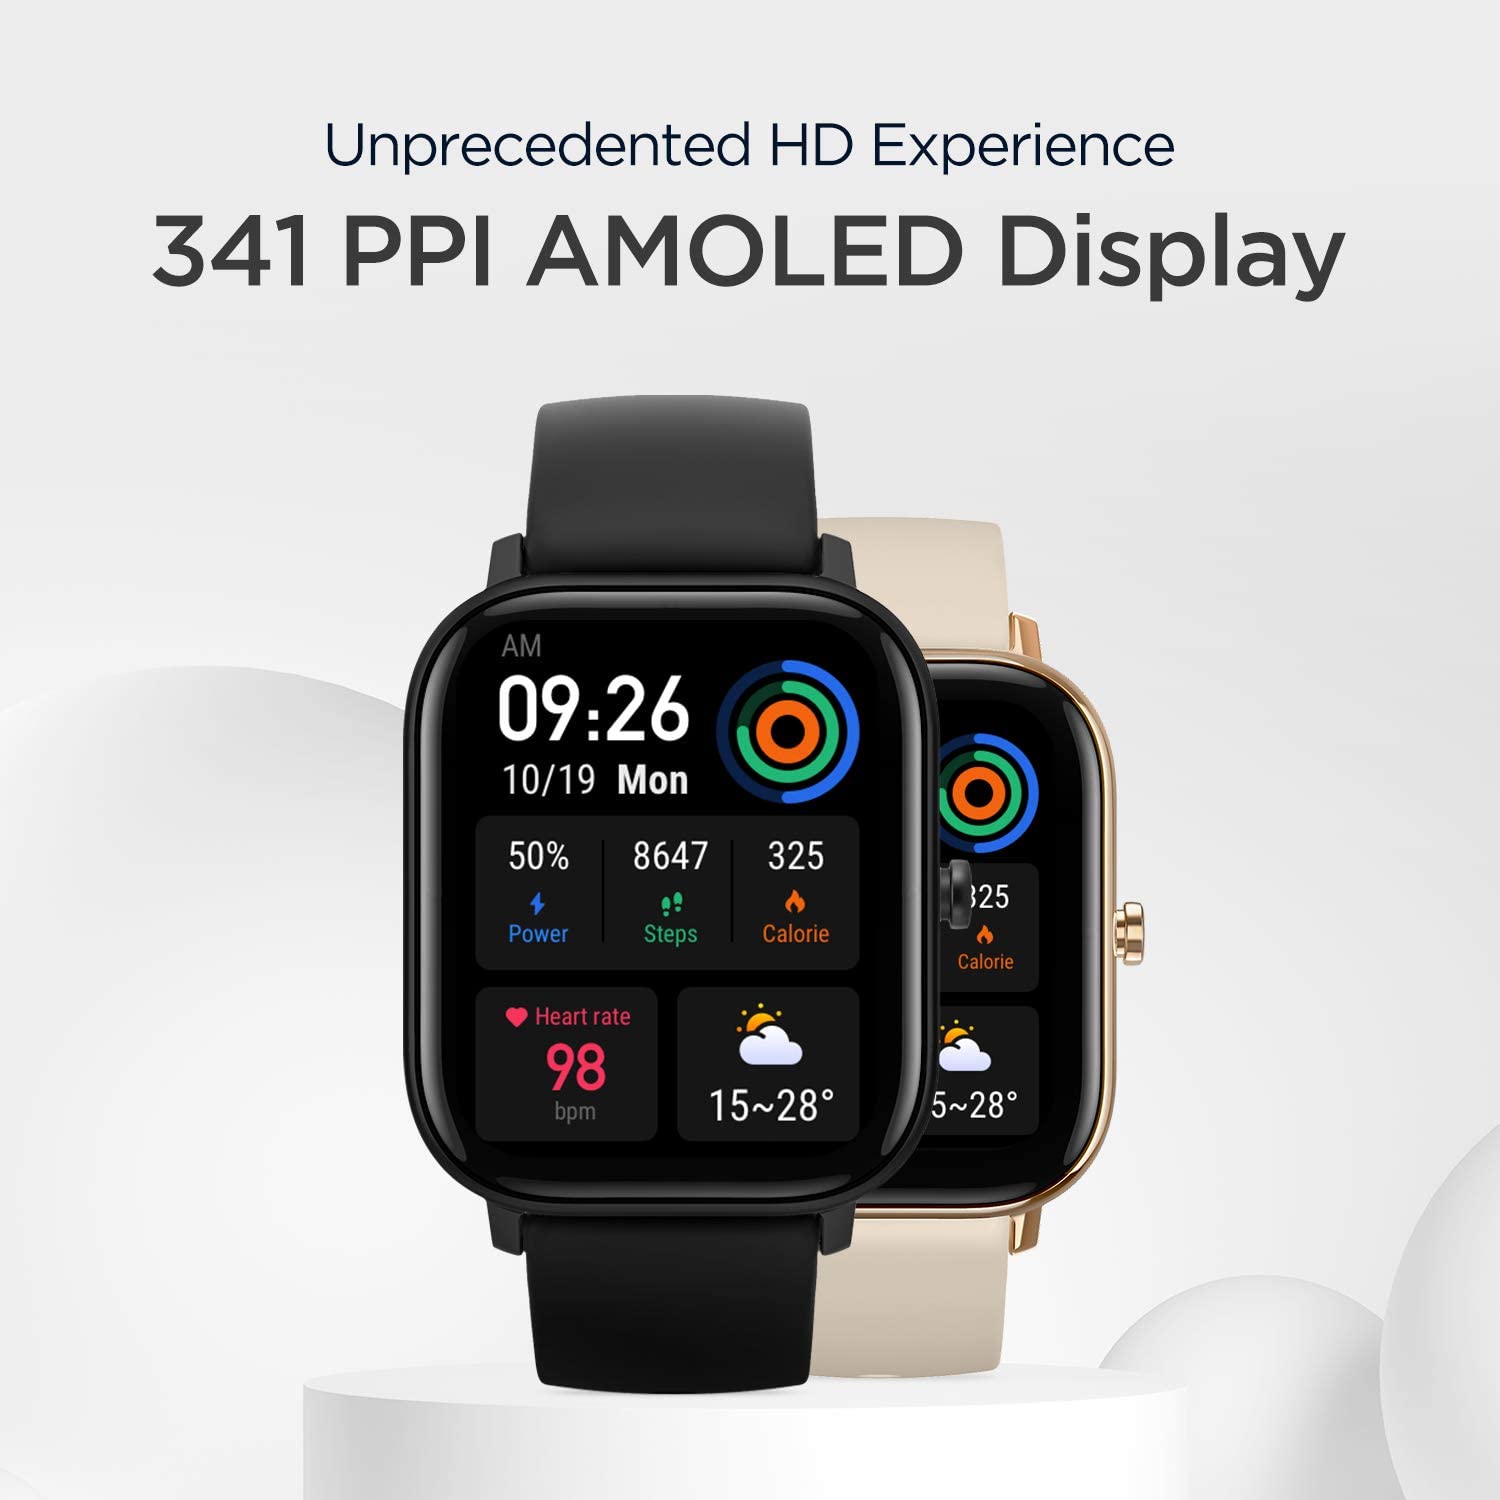 Amazfit Smartwatch GTS with 12 Sport Modes, GPS, 1.65 ”AMOLED Display, Fitness and Activity Tracker